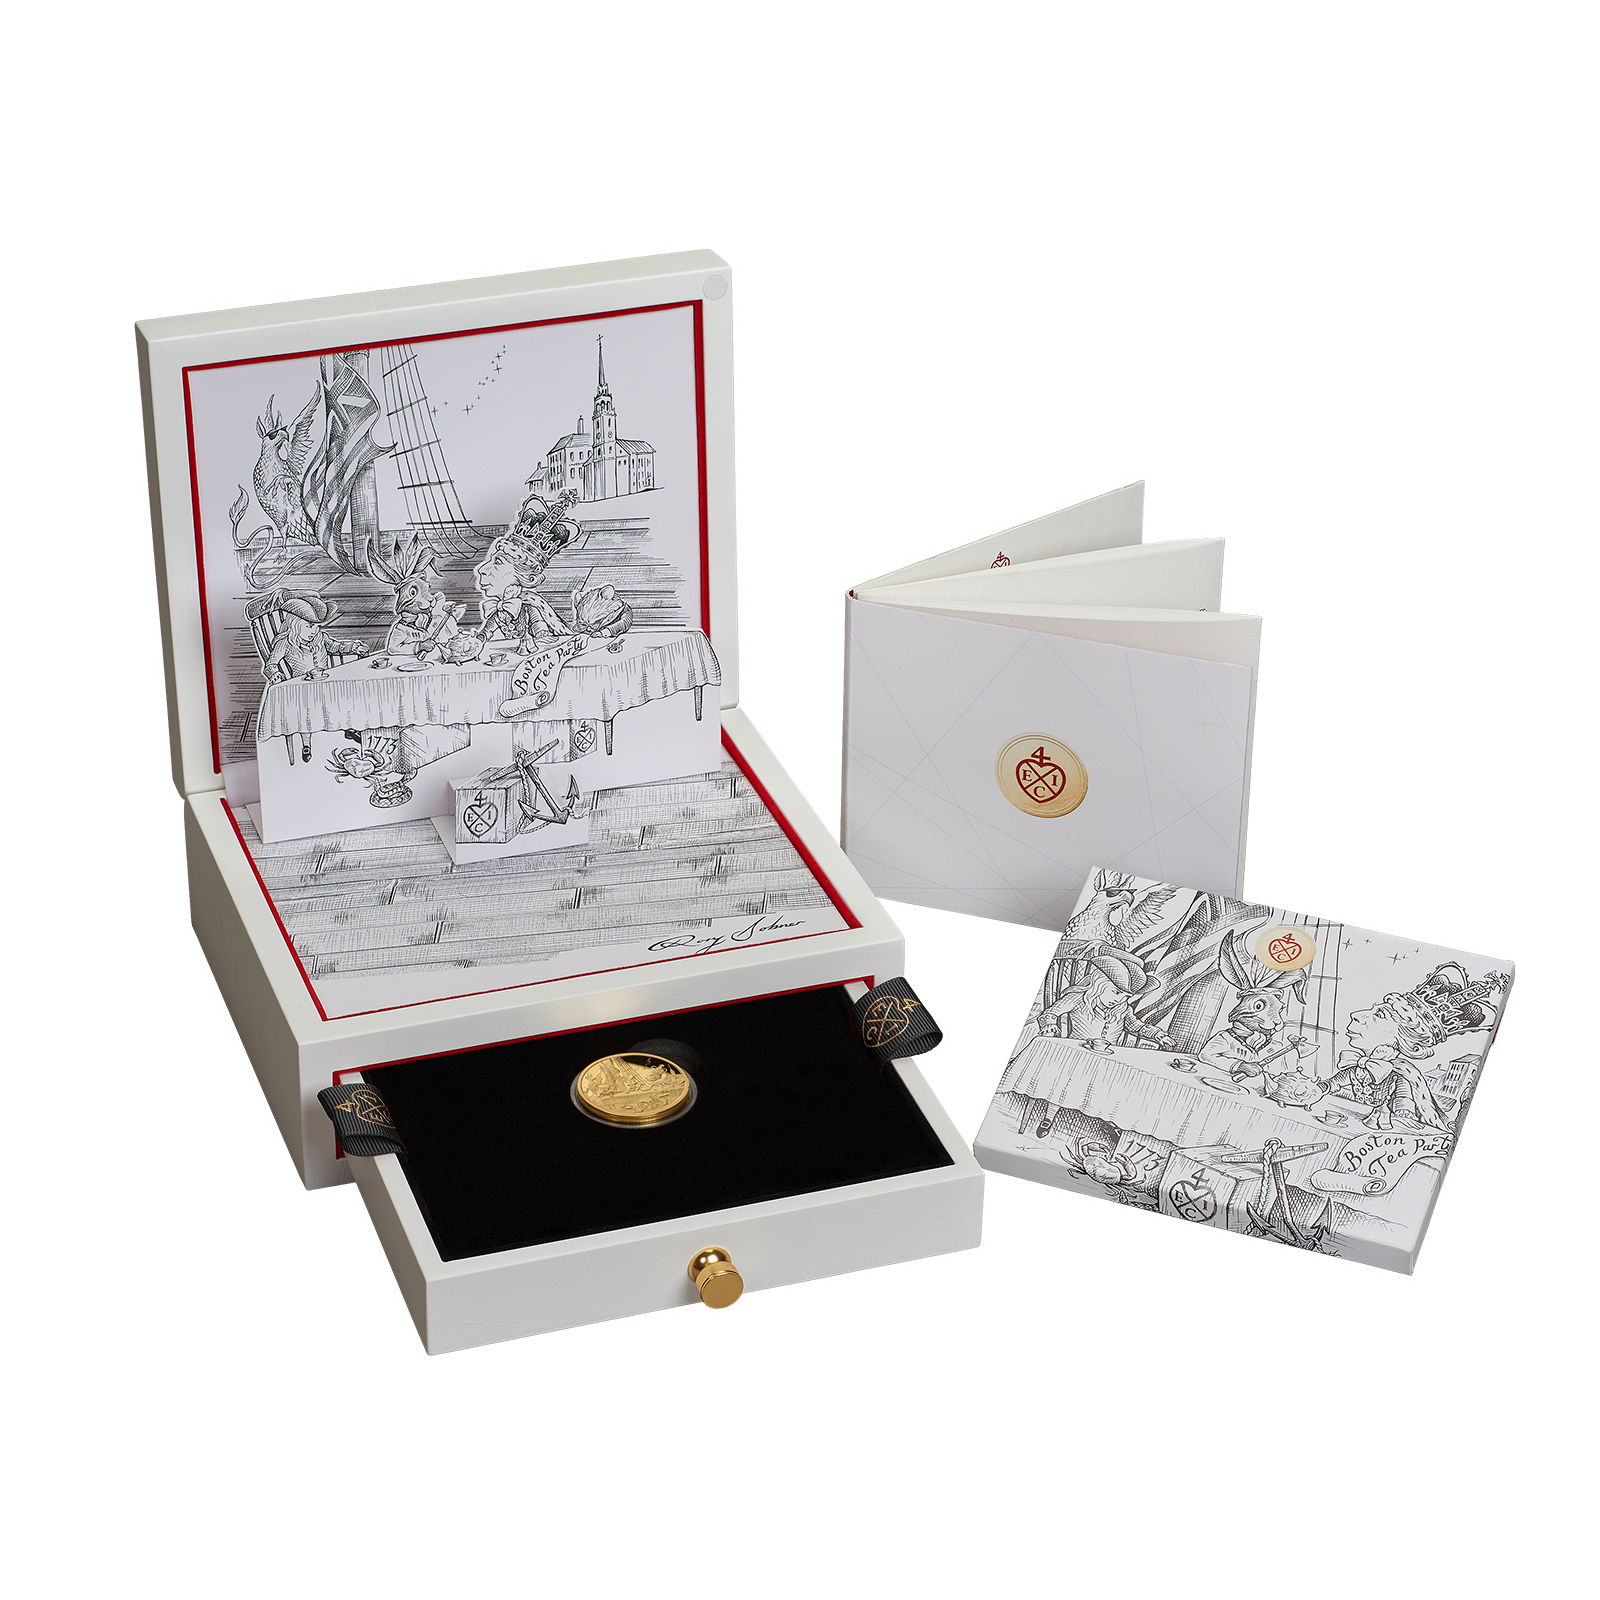 2023 Alice's Tea Party 1oz Gold Proof Coin